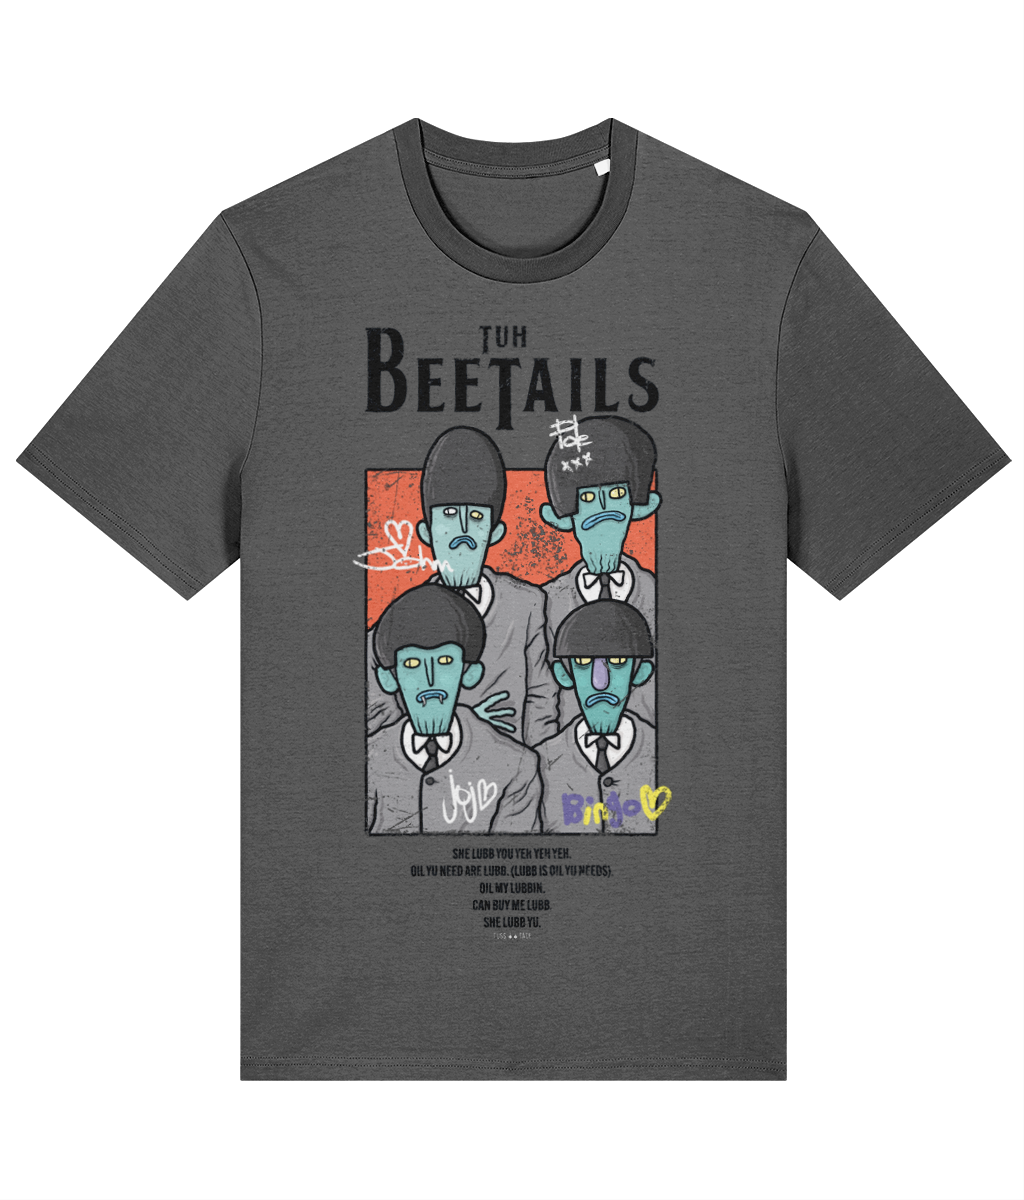 Tuh Beetails - TussFace T-shirt